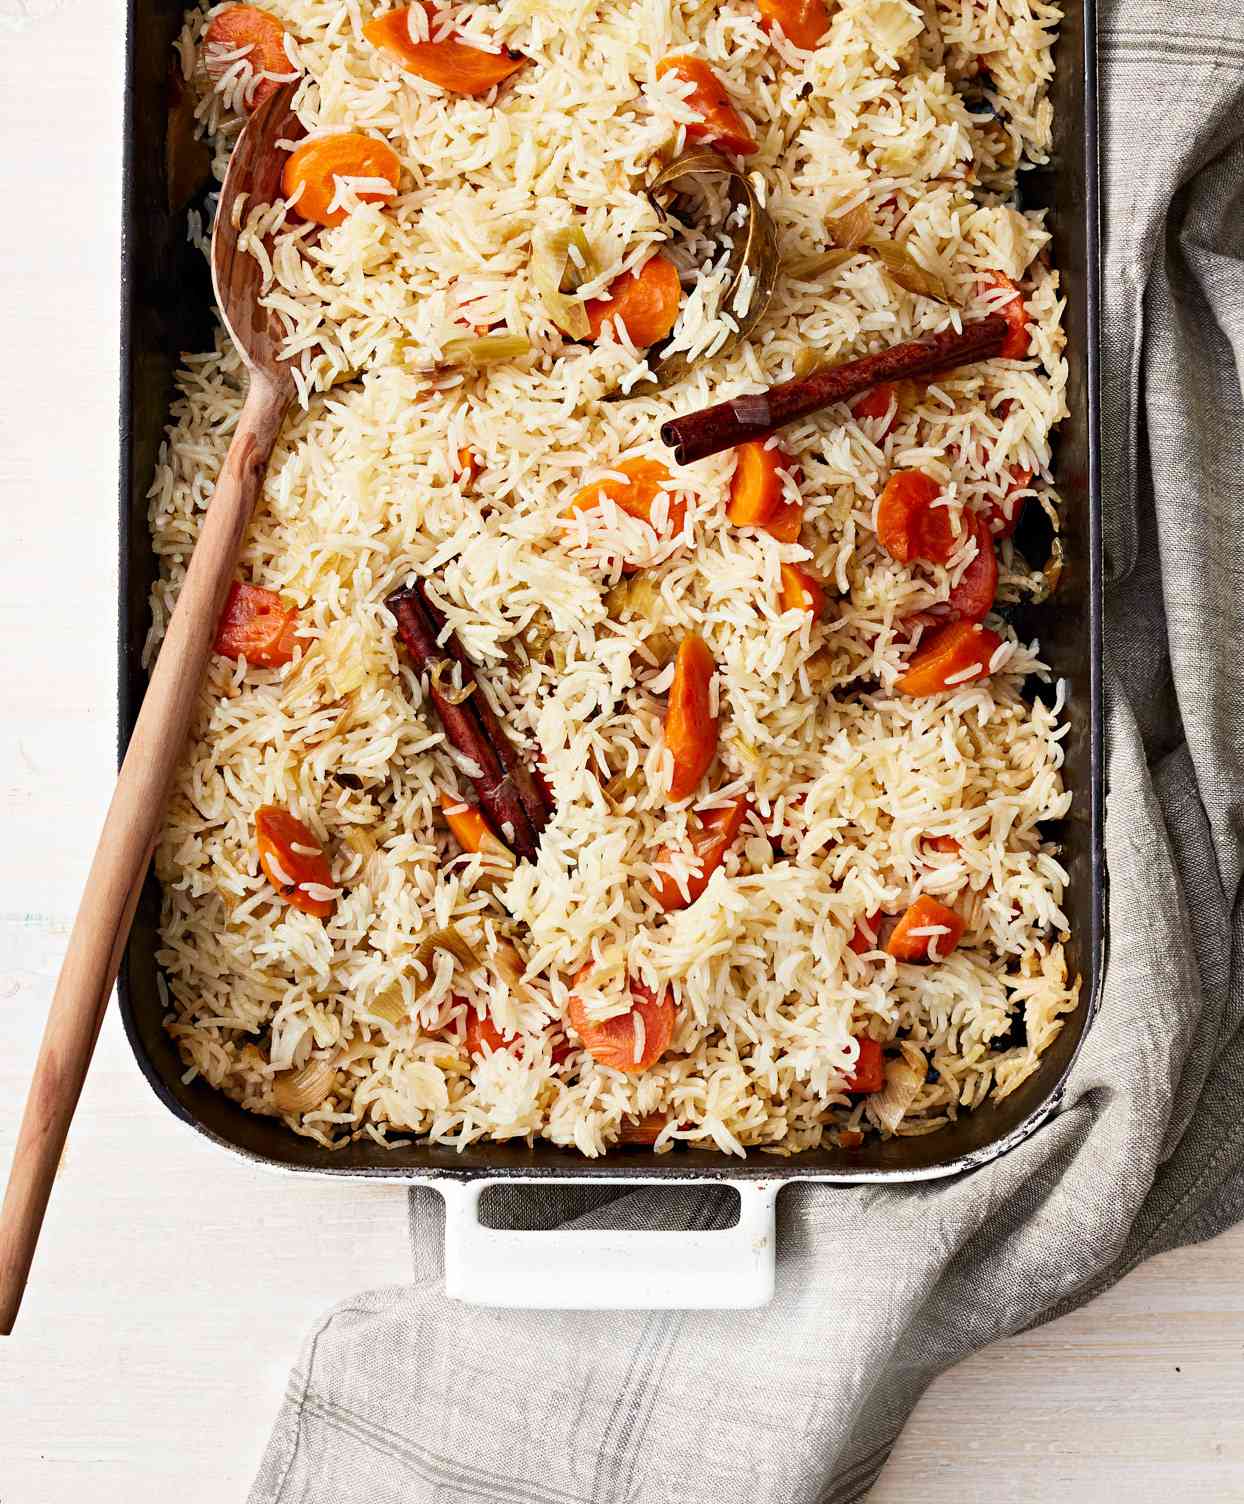 Baked Carrot-and-Leek Pilaf